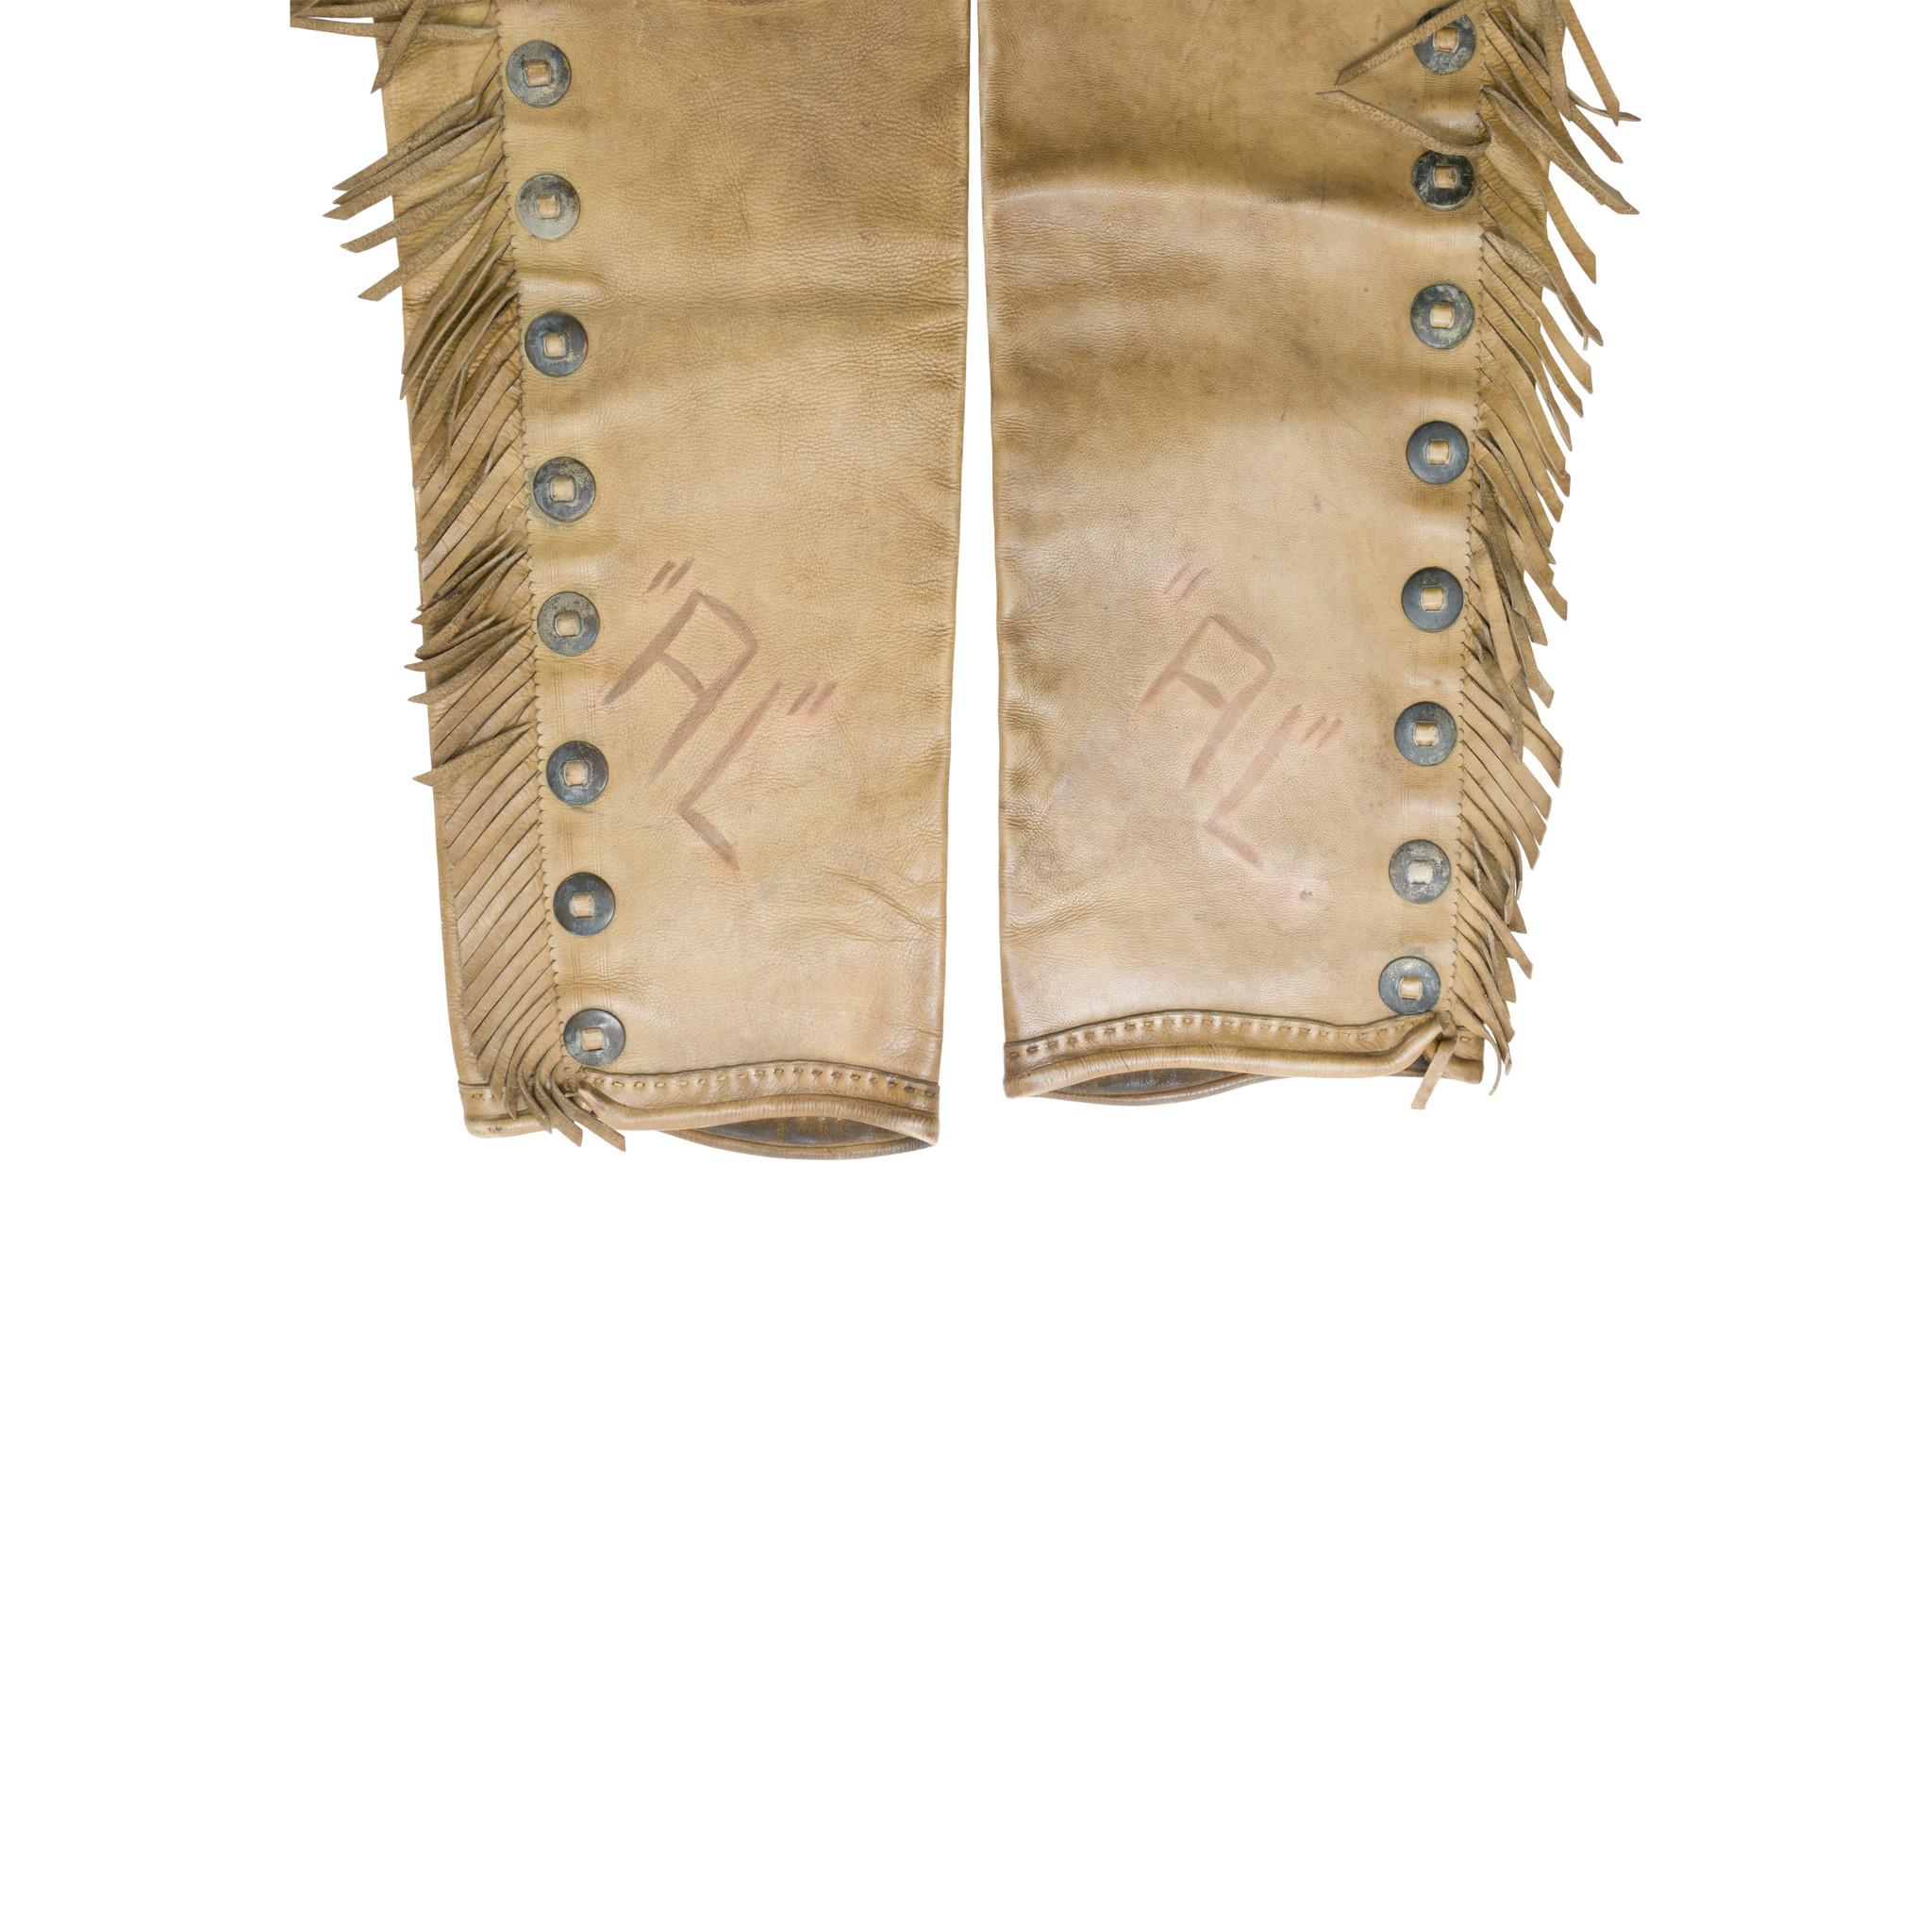 Vintage leather R.T. Frazier shotgun chaps with outside buck stitched pockets, fringe and conchos. Assume owner's initials or brand 